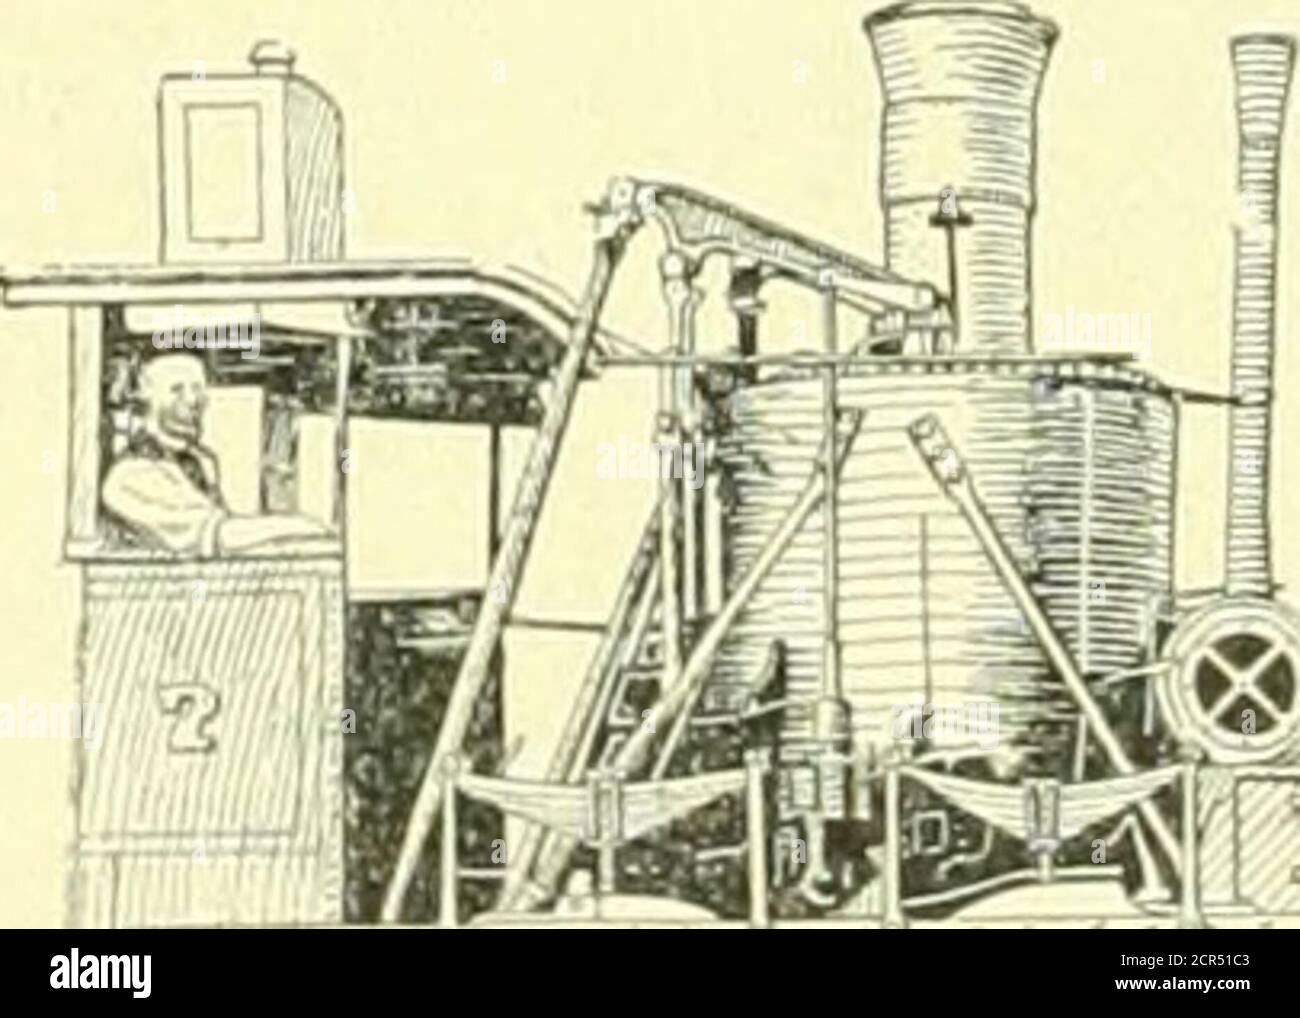 . Book of the Royal blue . That, other things equal, the engineof least weight would have the pre-ference. That the wheels should have insideflanges, and if coupled should not exceedthree feet in diameter, while if notcoupled, the single pair of driving wheelsshould not exceed four feet in diameter. That the pressure of the steamshould not exceed 100 lbs. to the squareinch, and should be as much below thatlimit as possible. That each engine should have twosafety valves out of the engineers con-trol. That each engine should have amercurial gauge to blow out if the steampressure exceeded 120 lbs Stock Photo